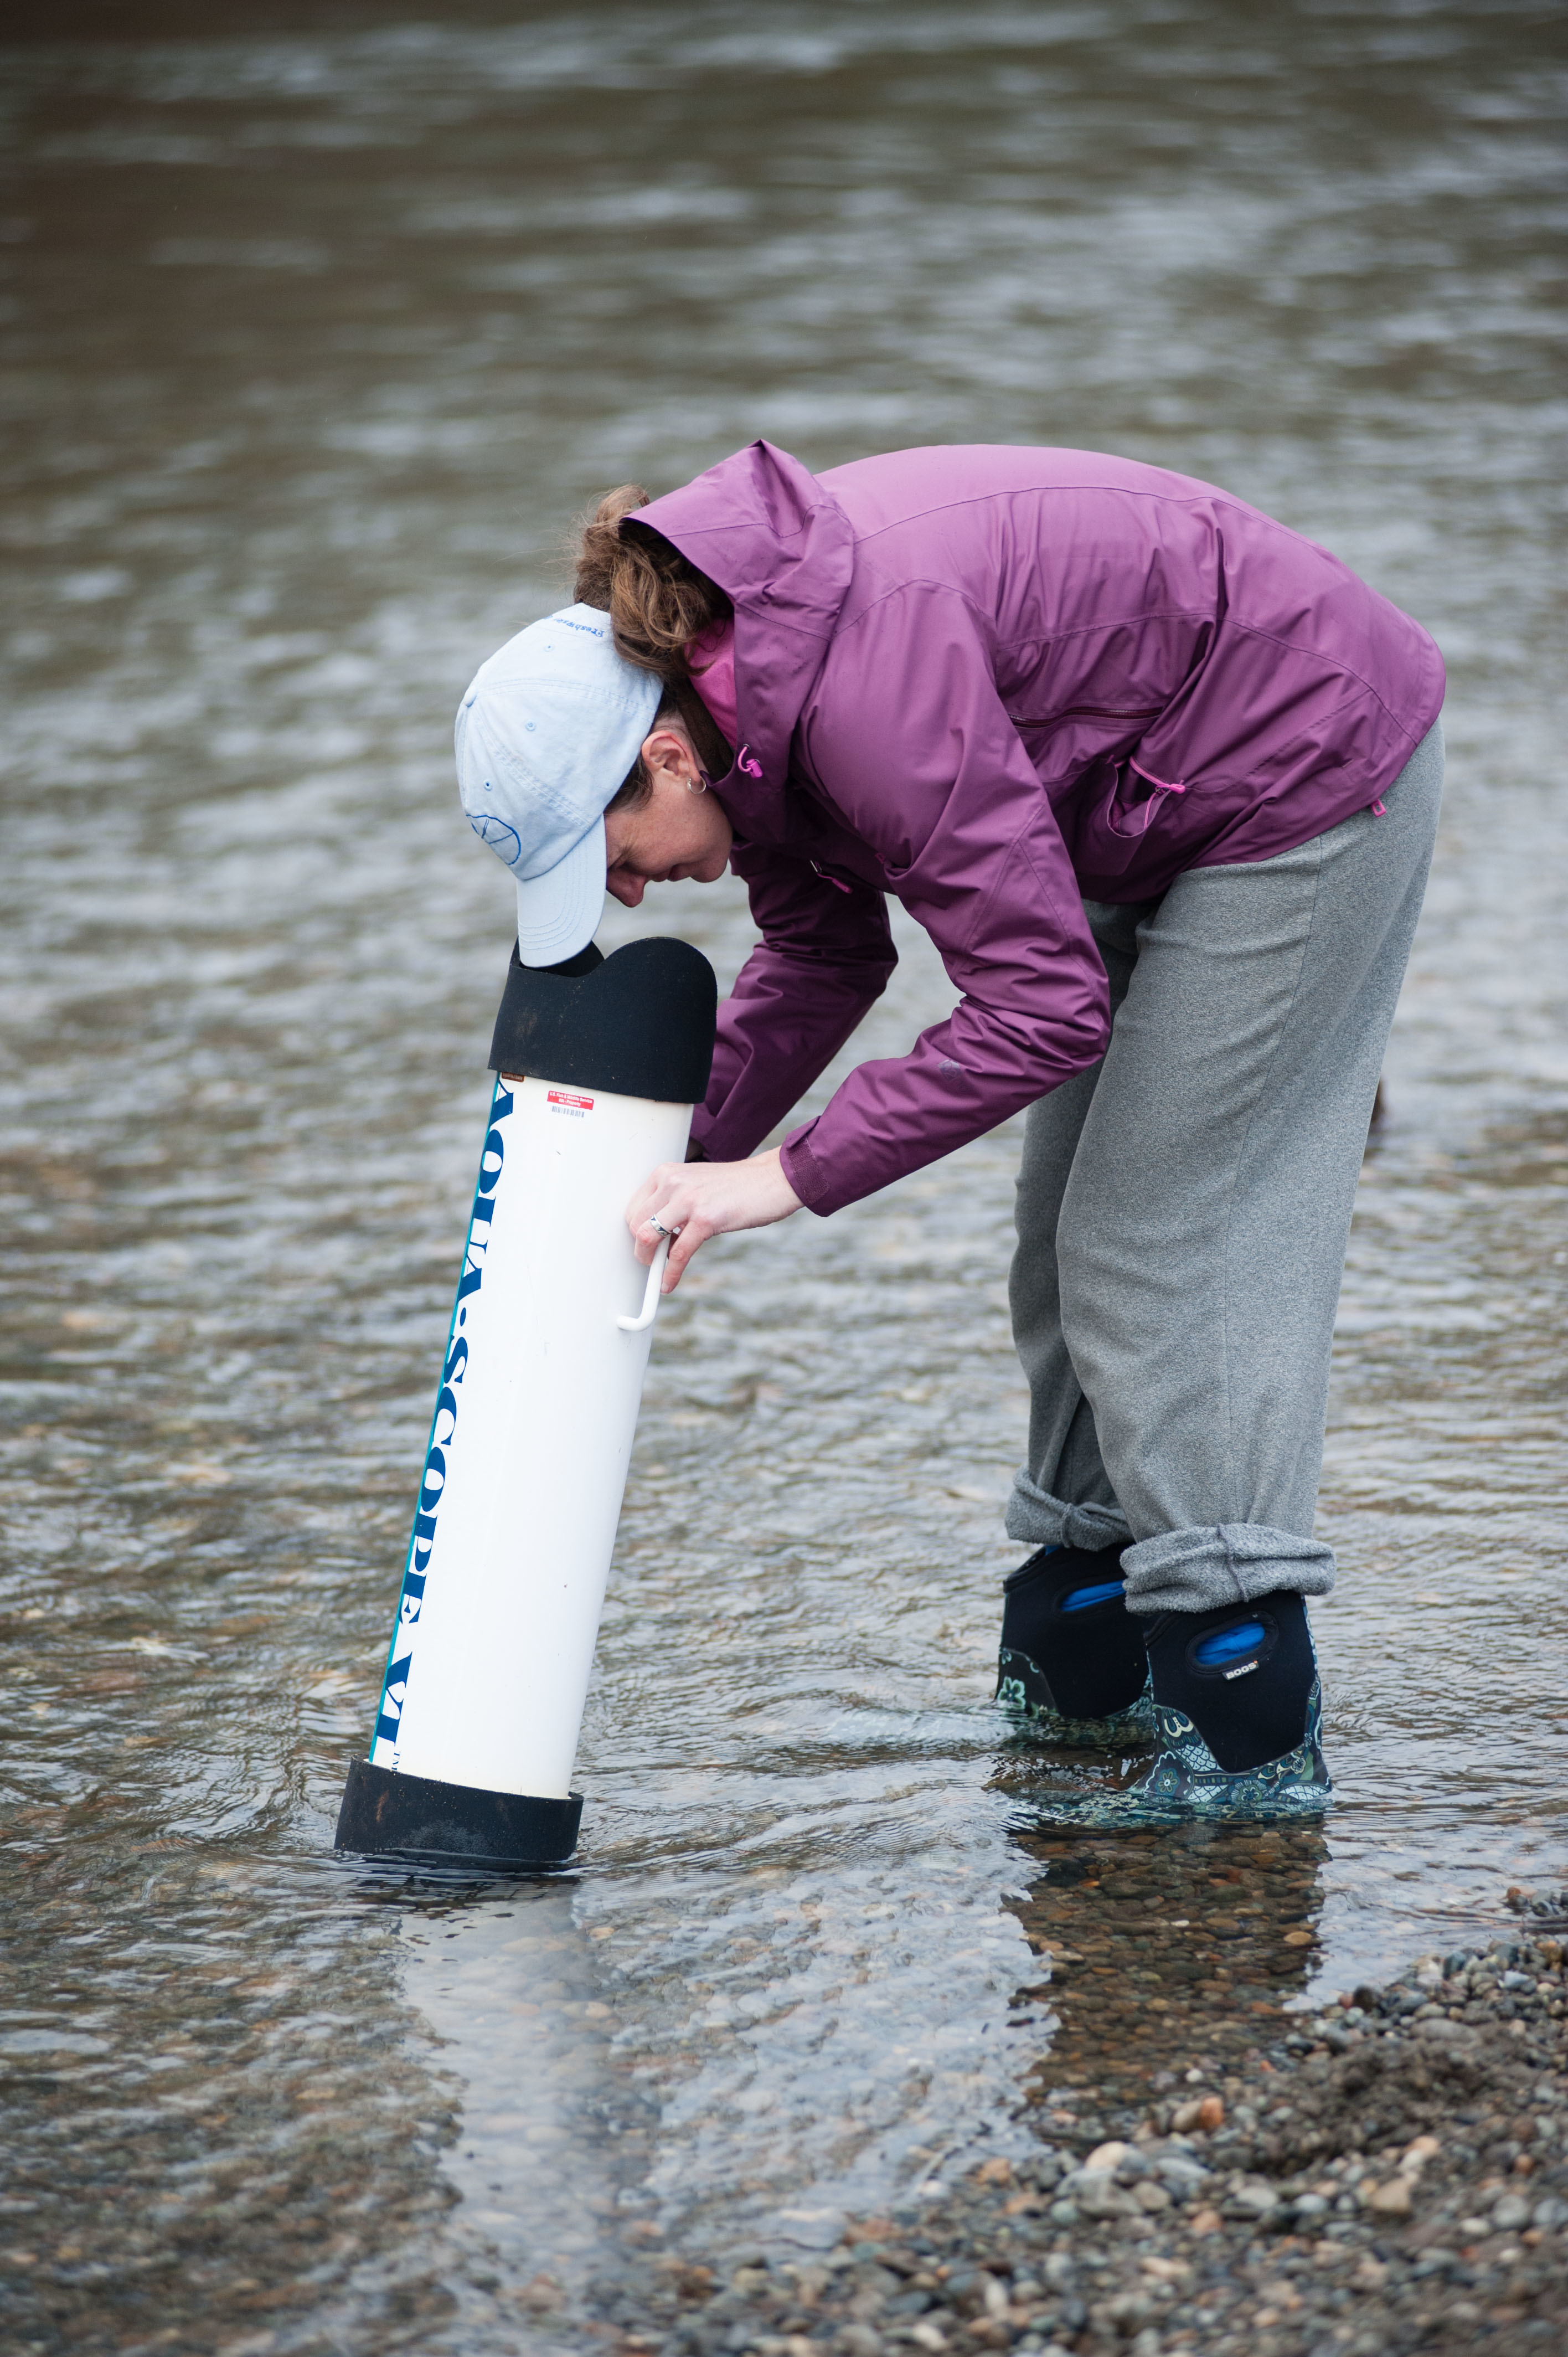 : Dr. Carri LeRoy analyzes stream particles looking through an aquascope 